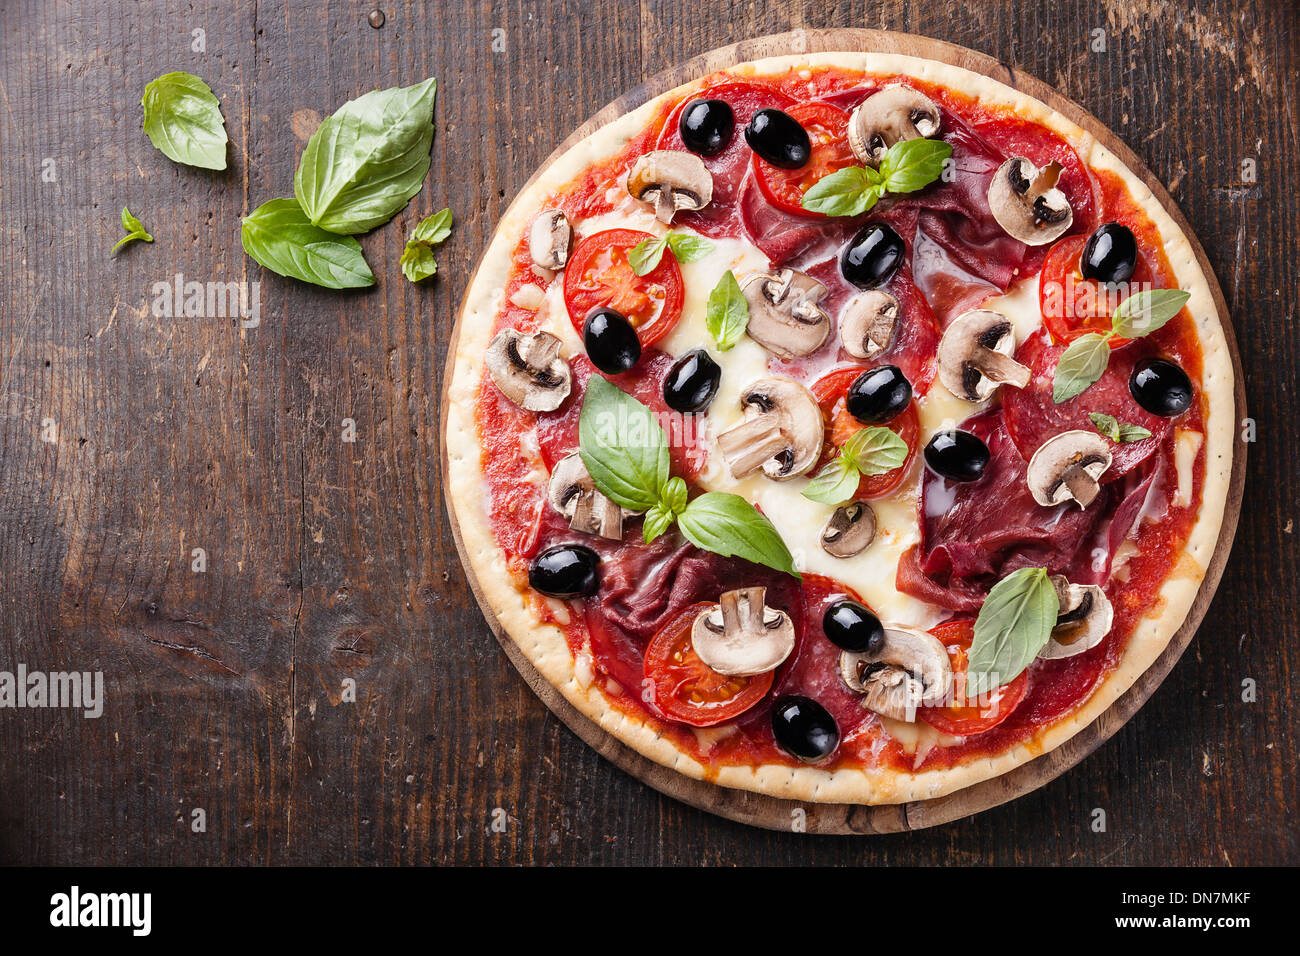 Italian pizza with salami, mushrooms and olives on wooden table Stock Photo